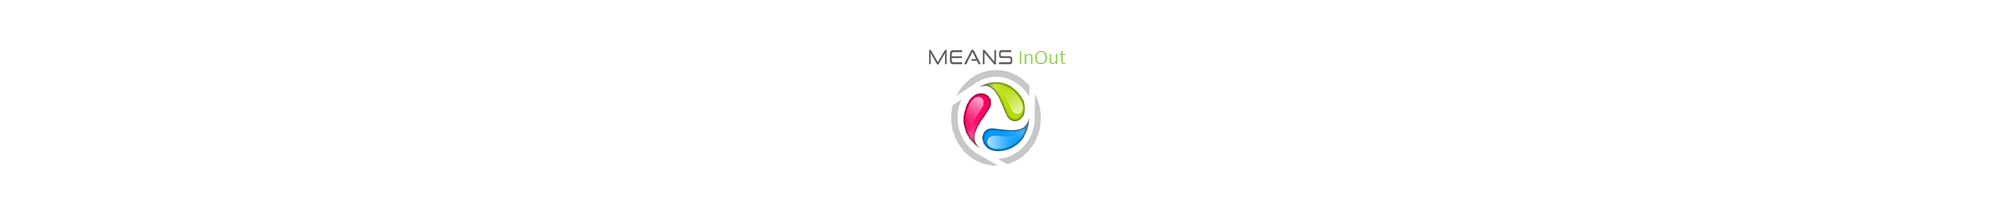 MEANS-InOut application user charter